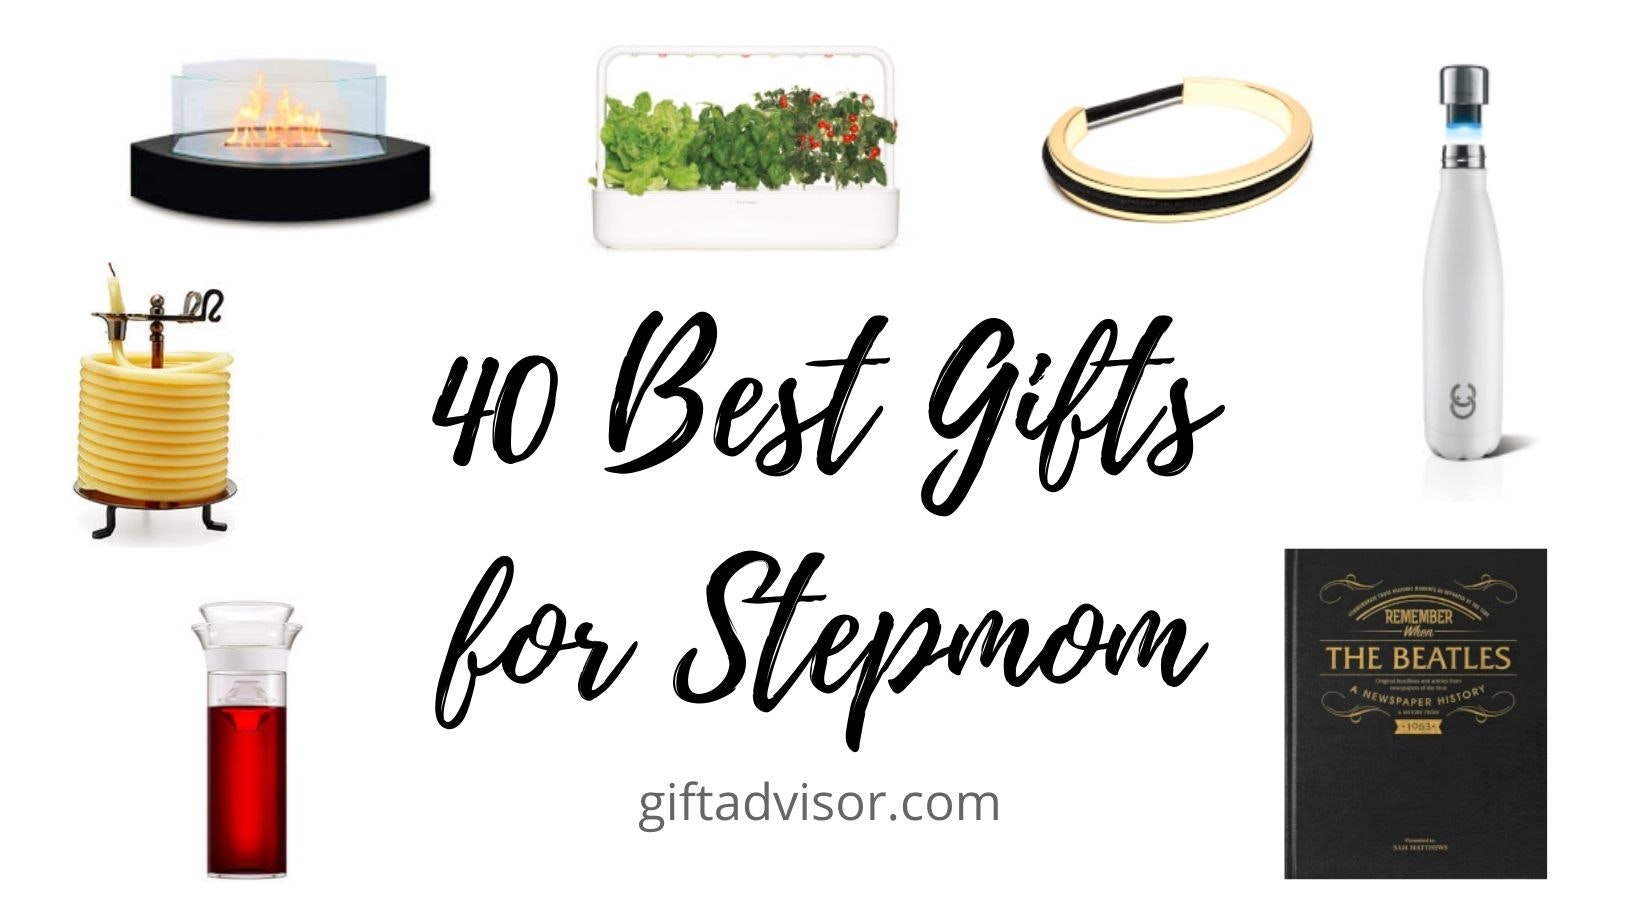 https://giftadvisor.imgix.net/blog-images/40-best-gifts-for-stepmom-v2.jpg?fit=crop&max-w=600&max-h=315